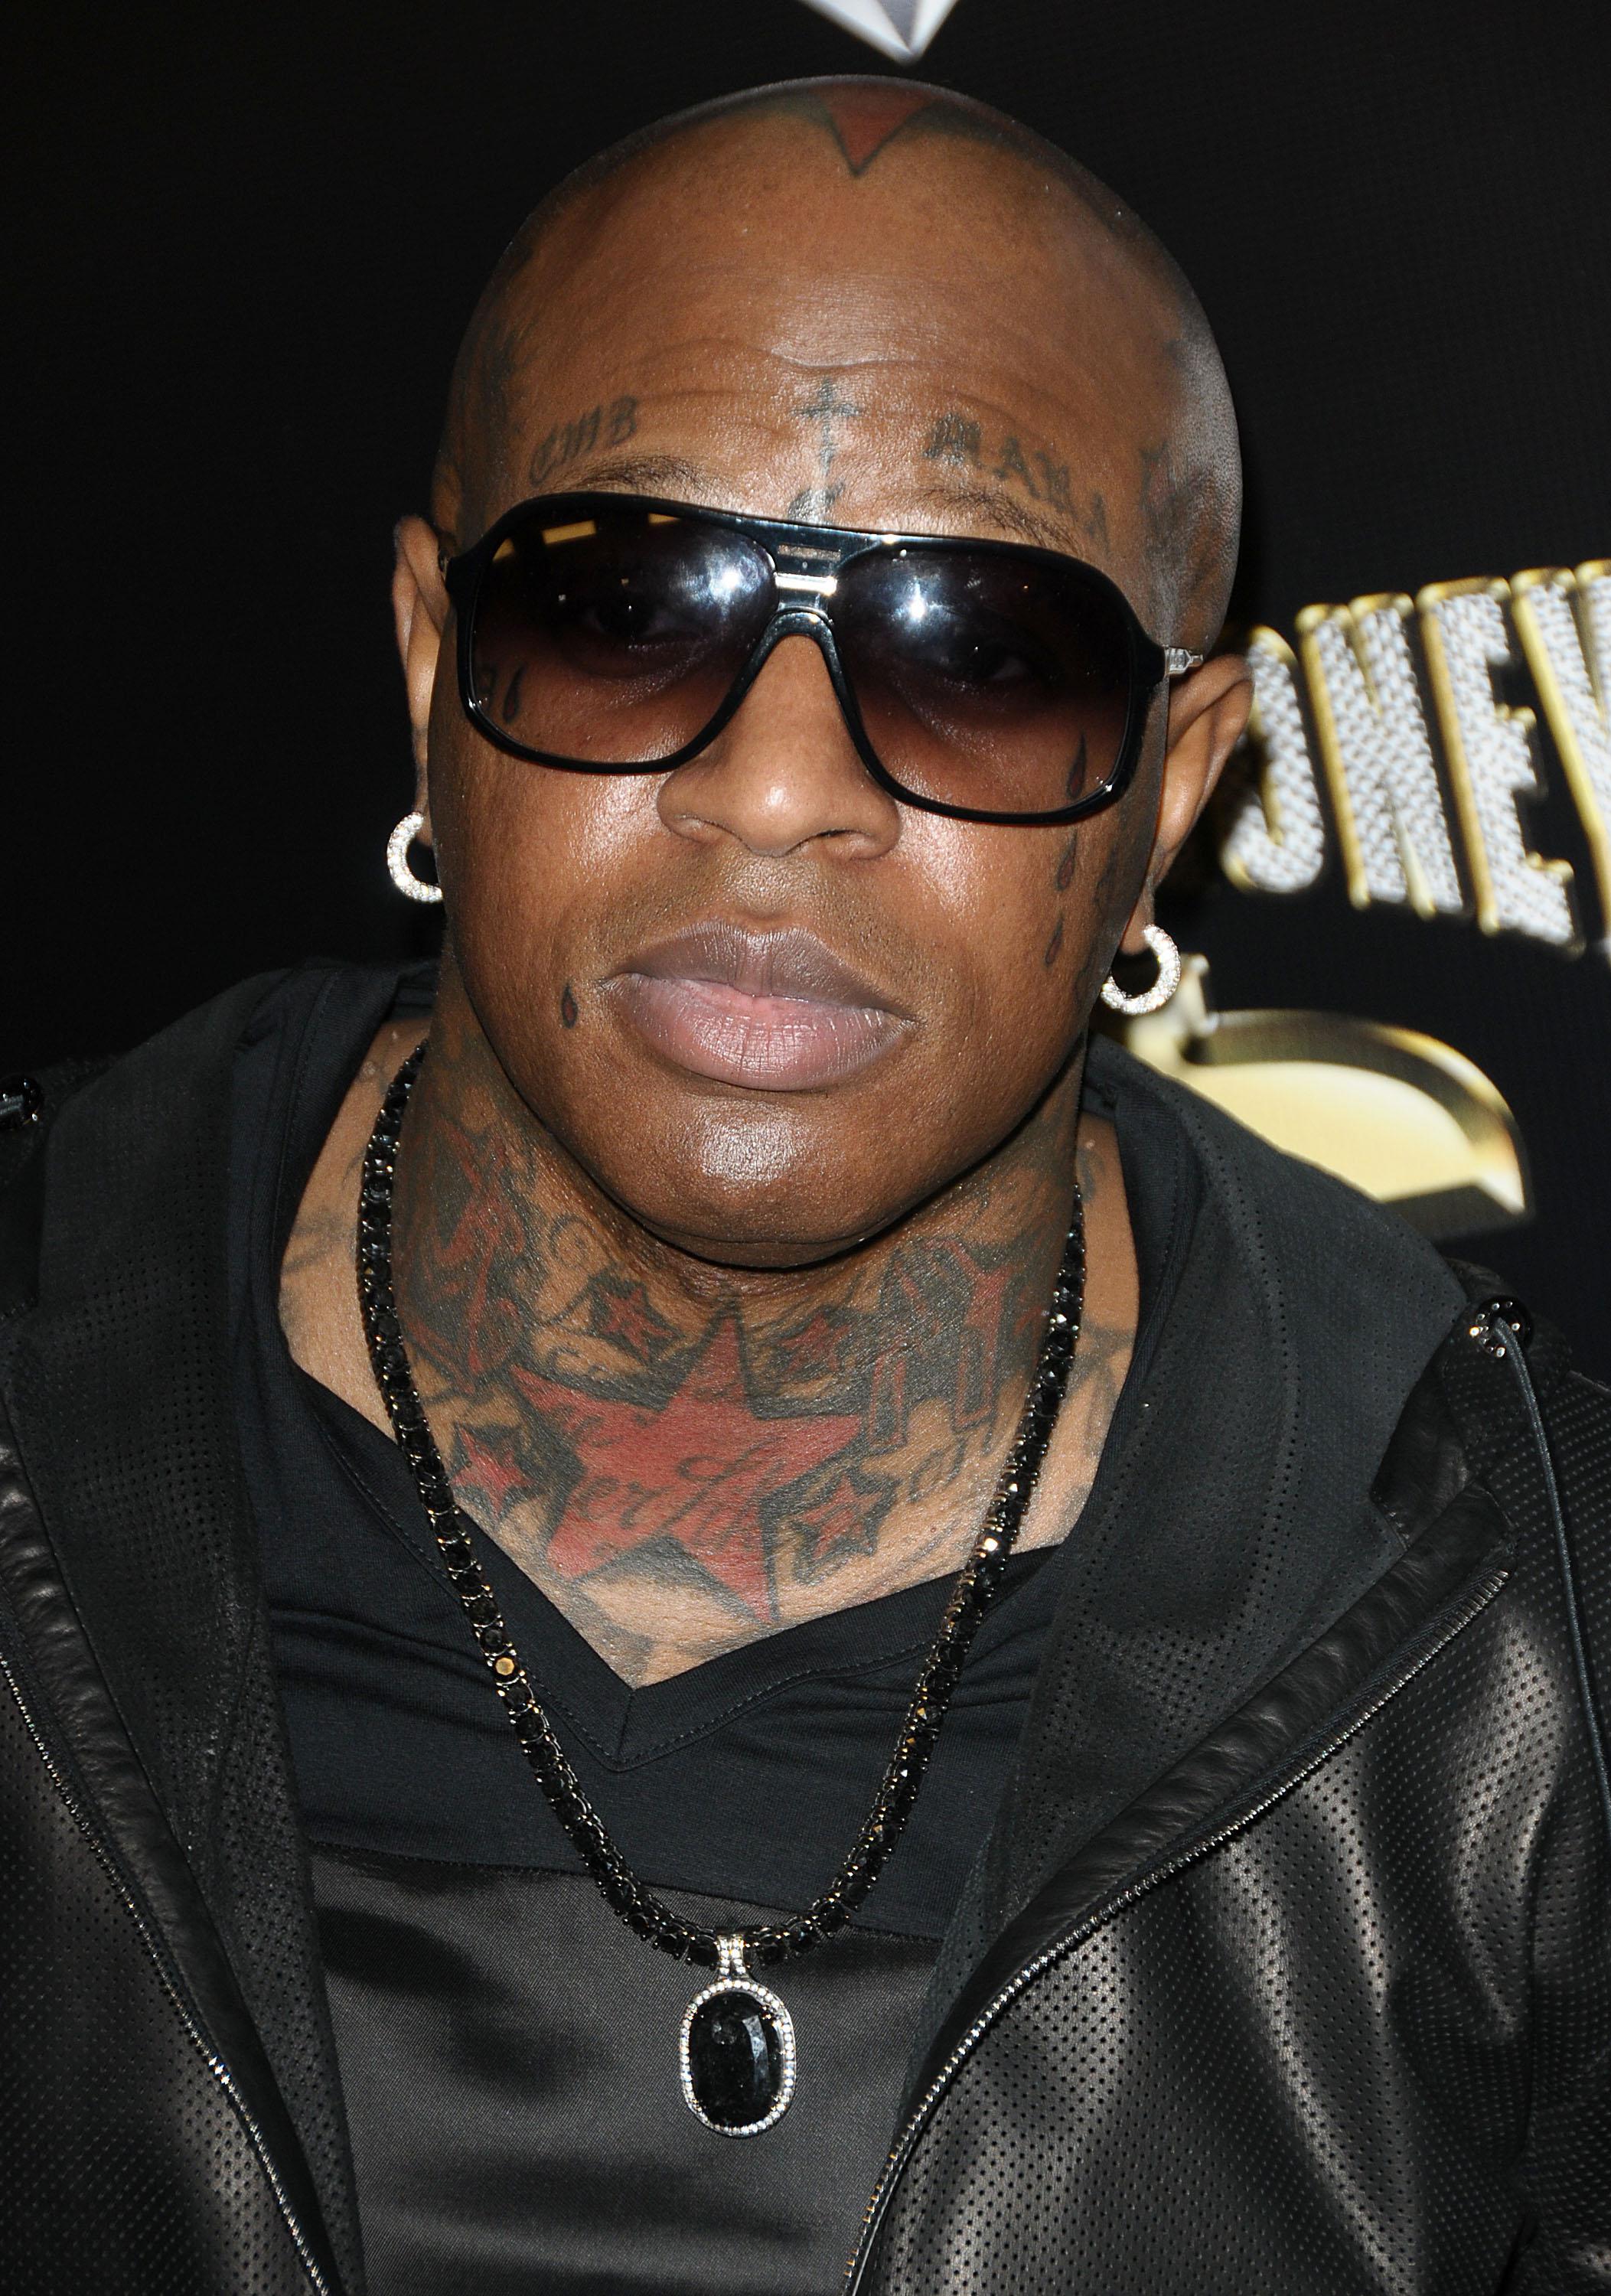 Rabby Racks SFB on Twitter HipHopDX Birdmans new Rich Gang face  tattoo Yay or Nay httptcomg2EjB30d5nay  Twitter